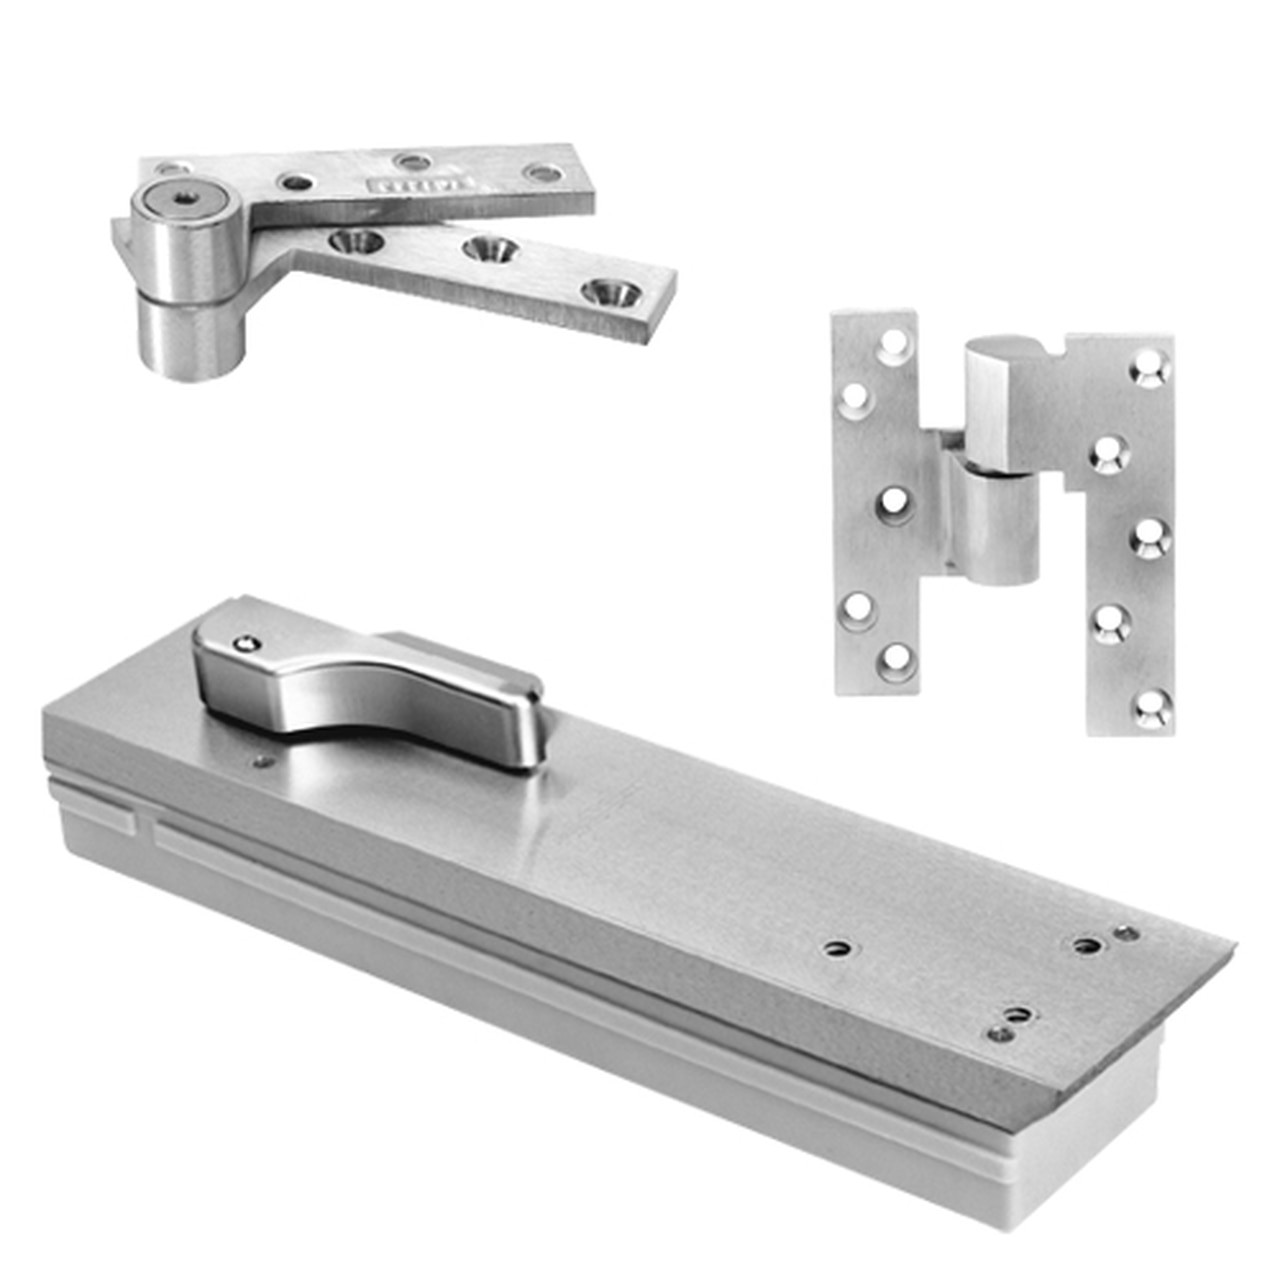 FQ5105NBC-LFP-LCC-RH-625 Rixson Q51 Series Fire Rated 3/4" Offset Hung Shallow Depth Floor Closers in Bright Chrome Finish